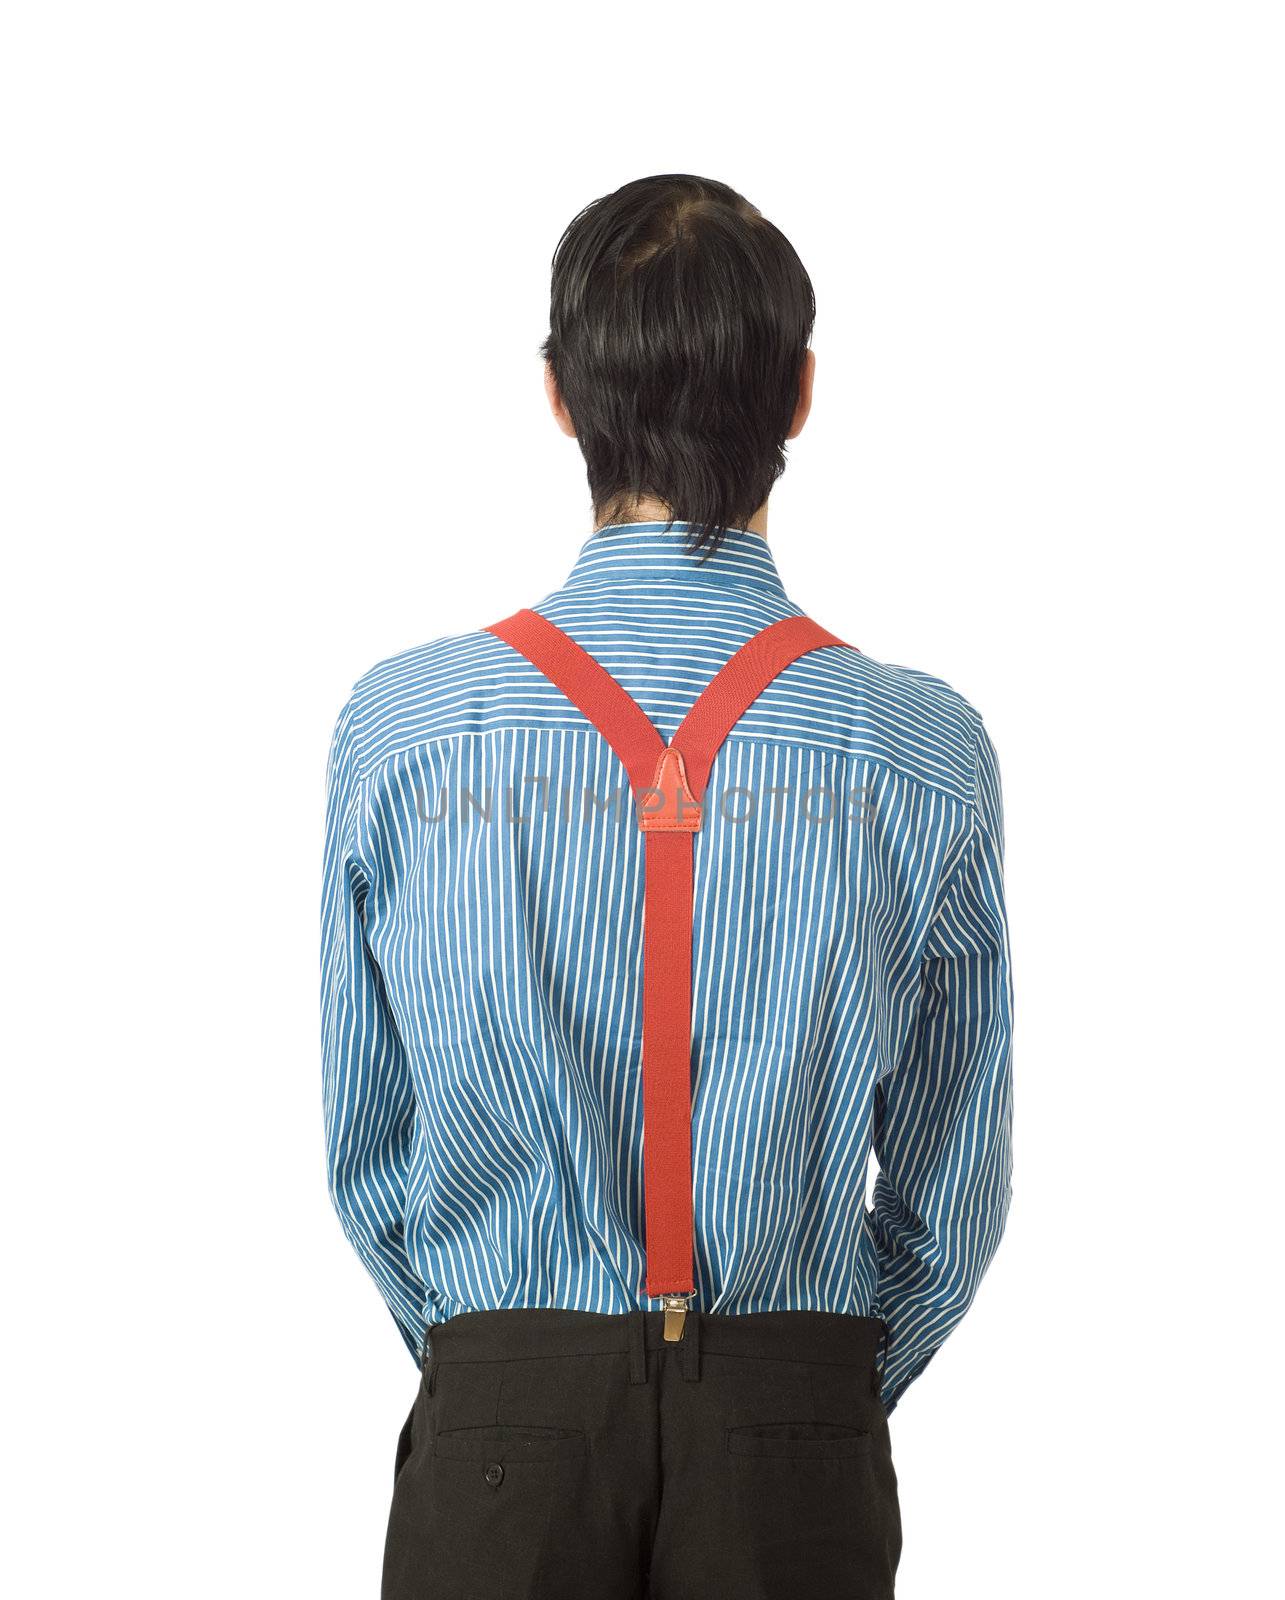 Back of Nerd businessman manager with blue shirt and red braces from the back on white